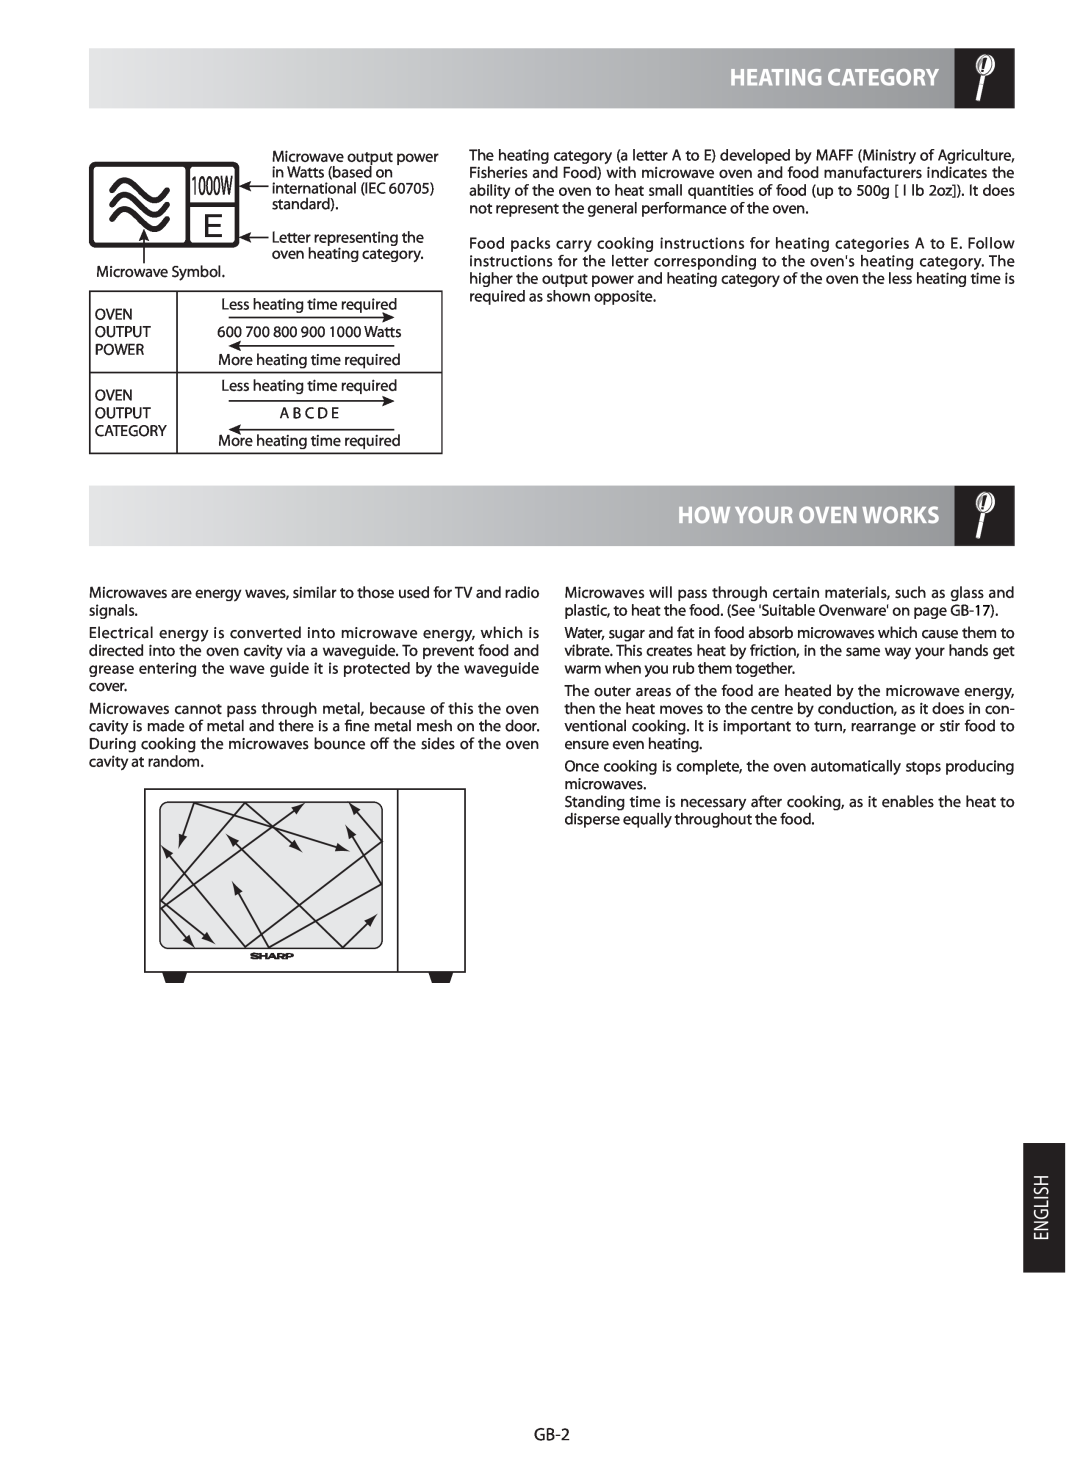 Sharp R-982STM operation manual Heating Category, How Your Oven Works, English, GB-2 